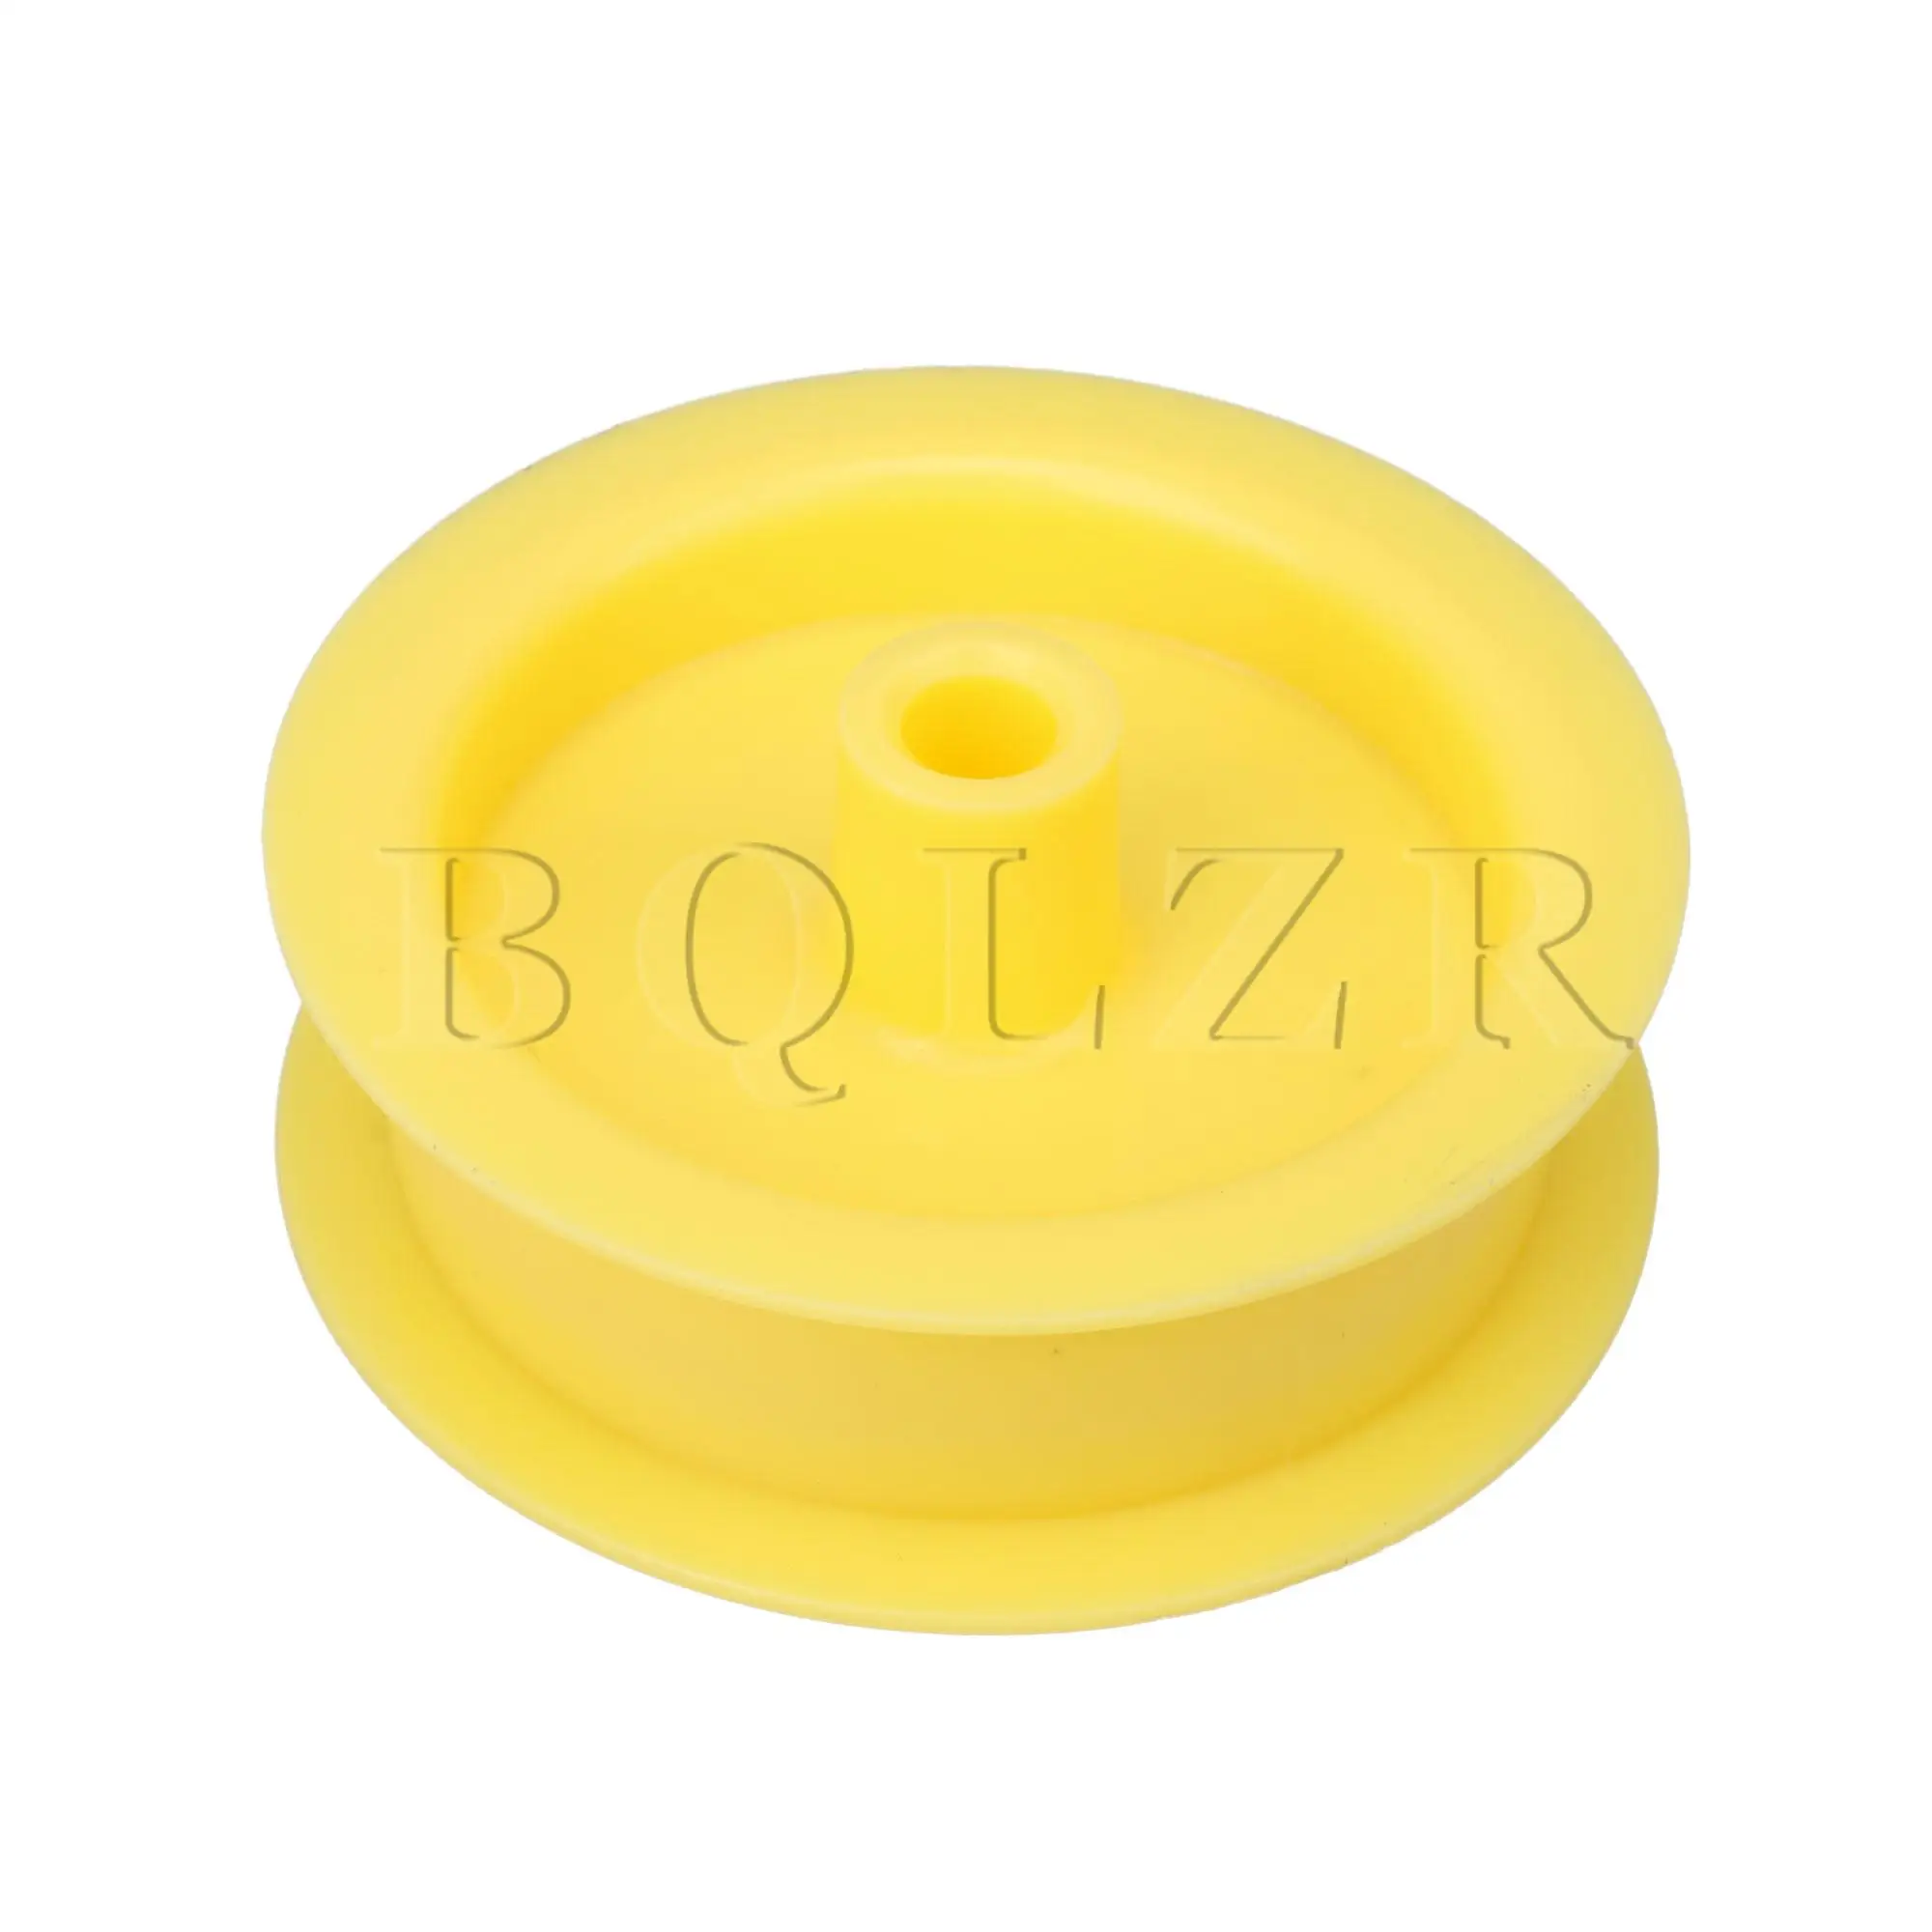 

50x BQLZR WE12X83 Dryer Idler Pulley Wheel Replacement for Whirlpool Dryer Yellow